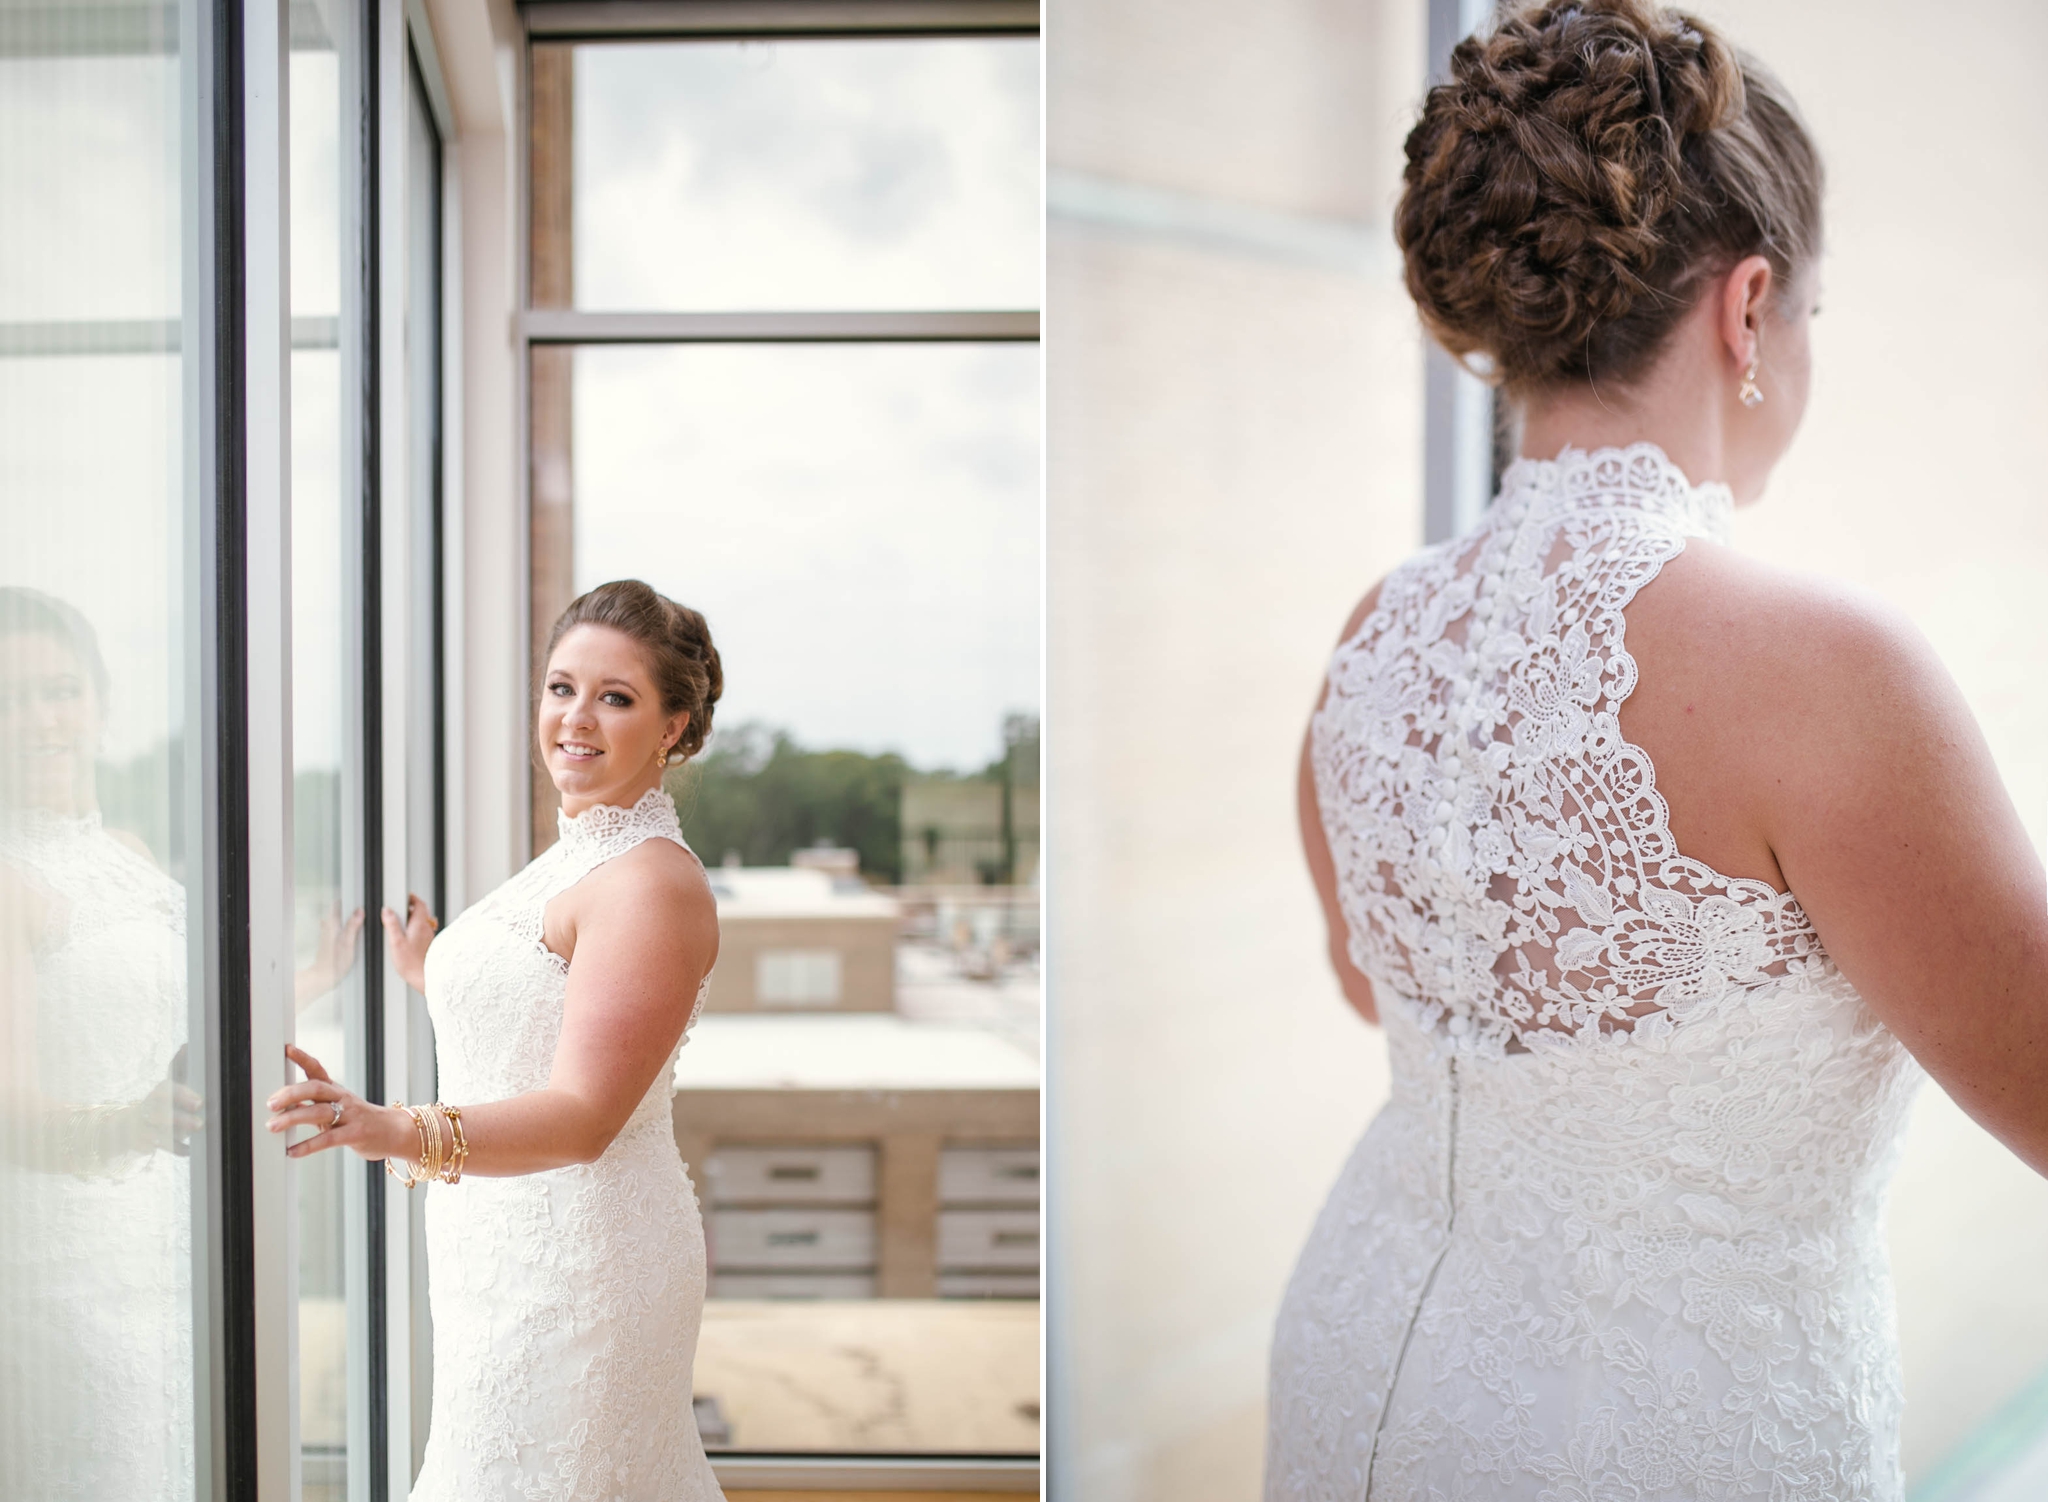 Bridal Photography Session at the Glass Box in Raleigh North Carolina